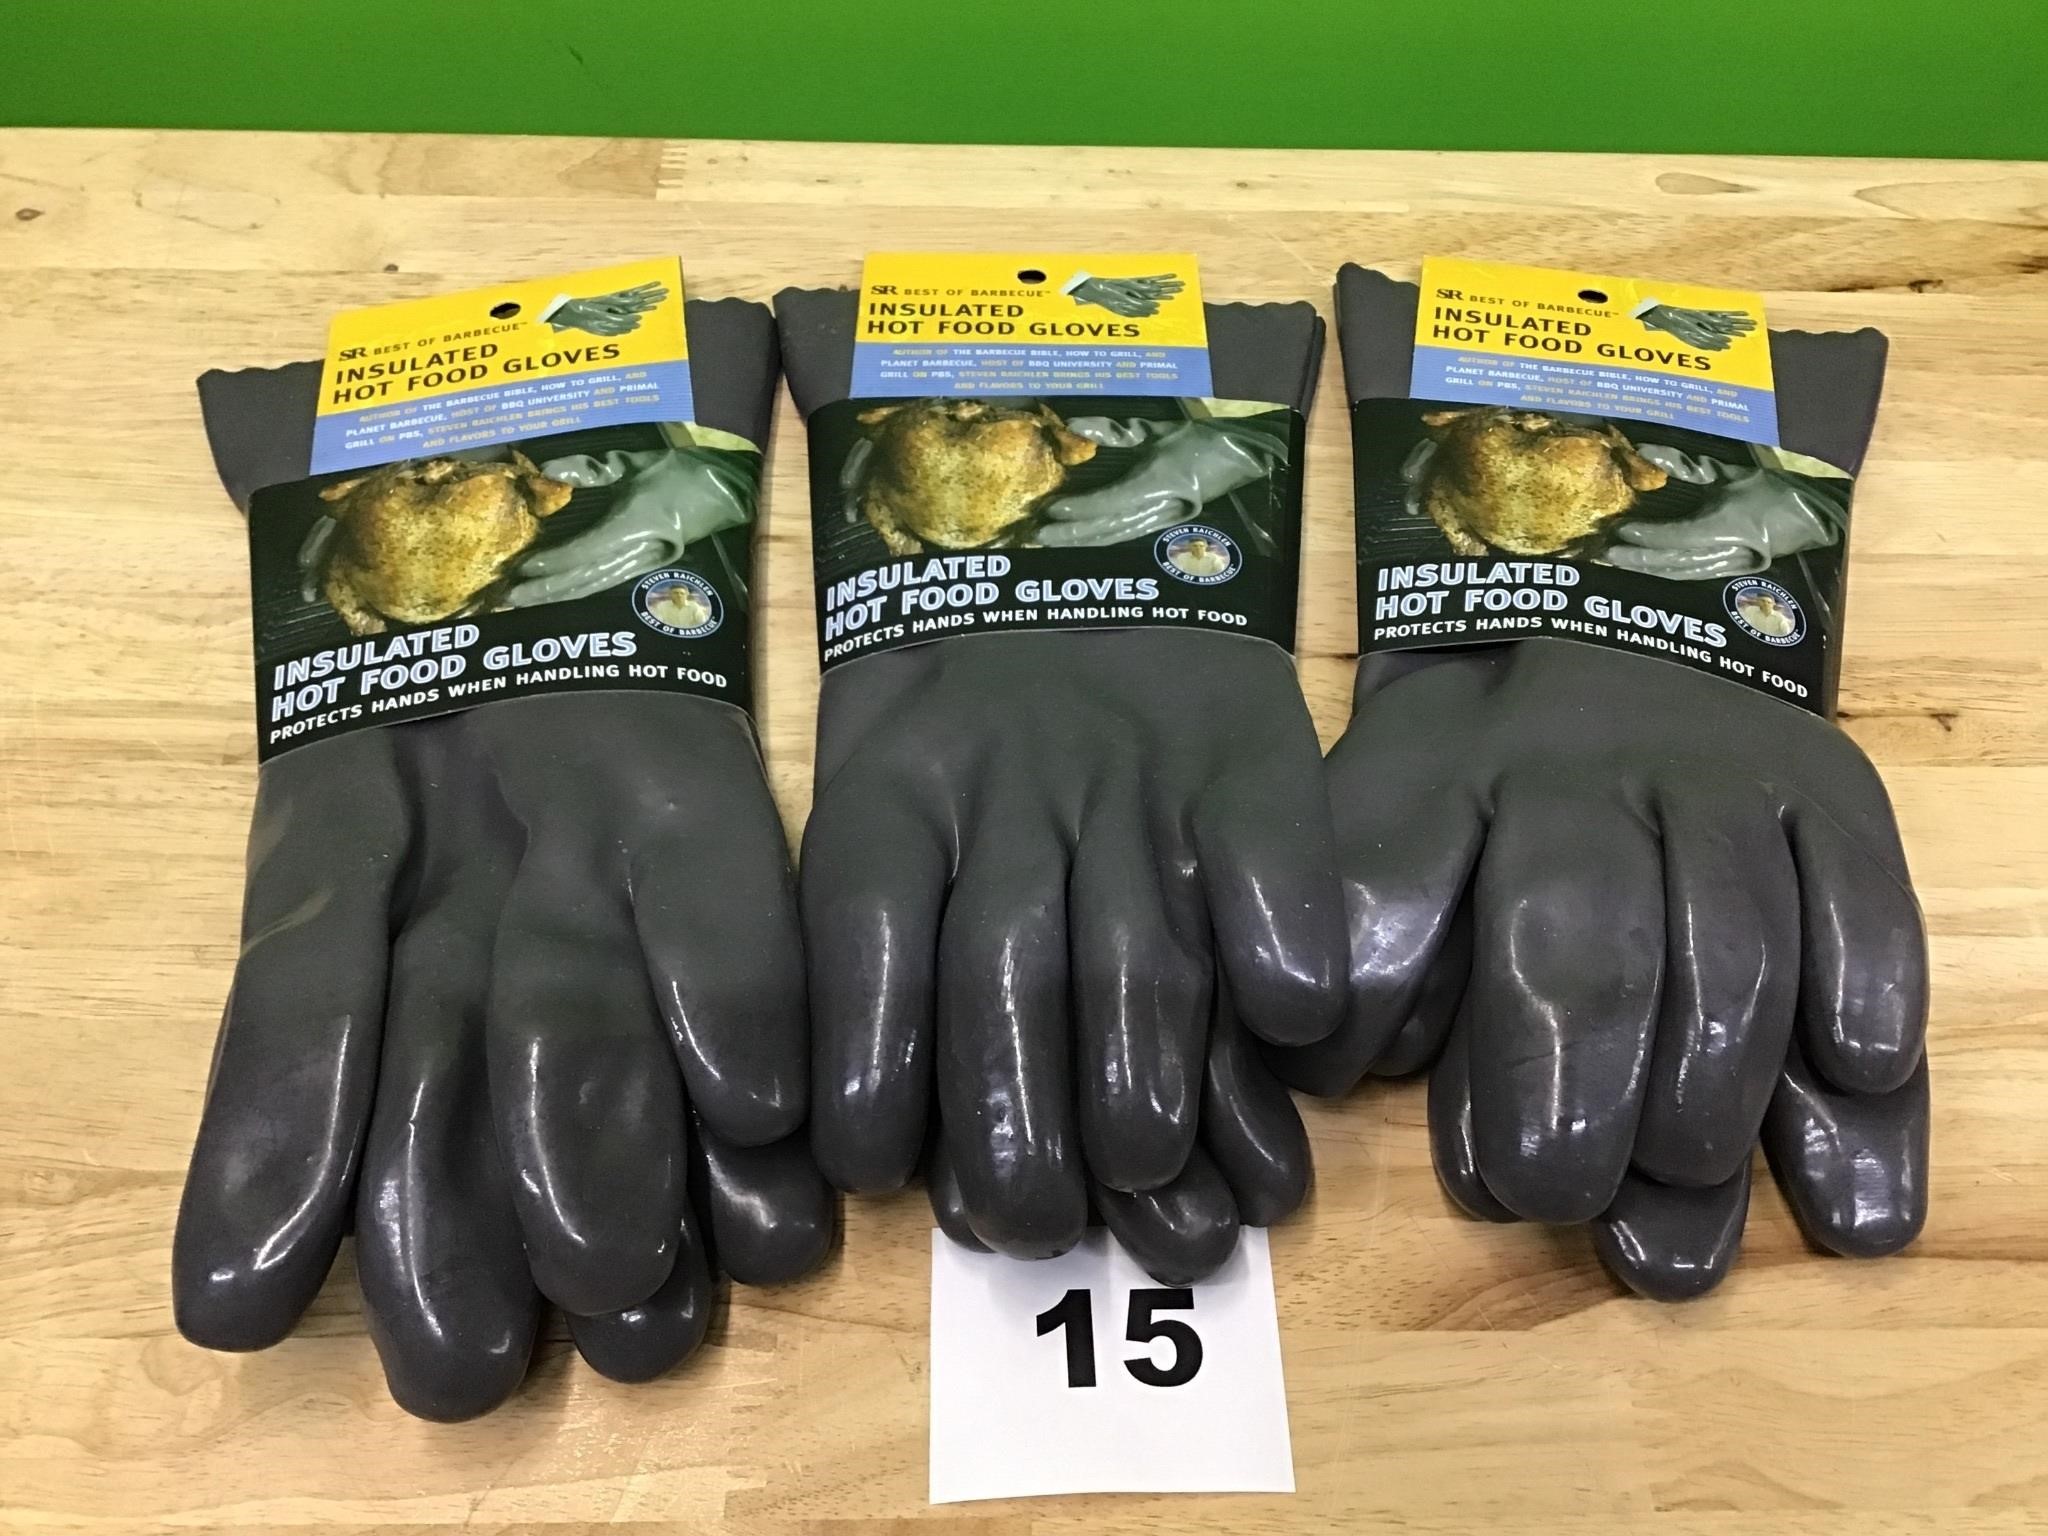 Insulated Hot Food Gloves lot of 3